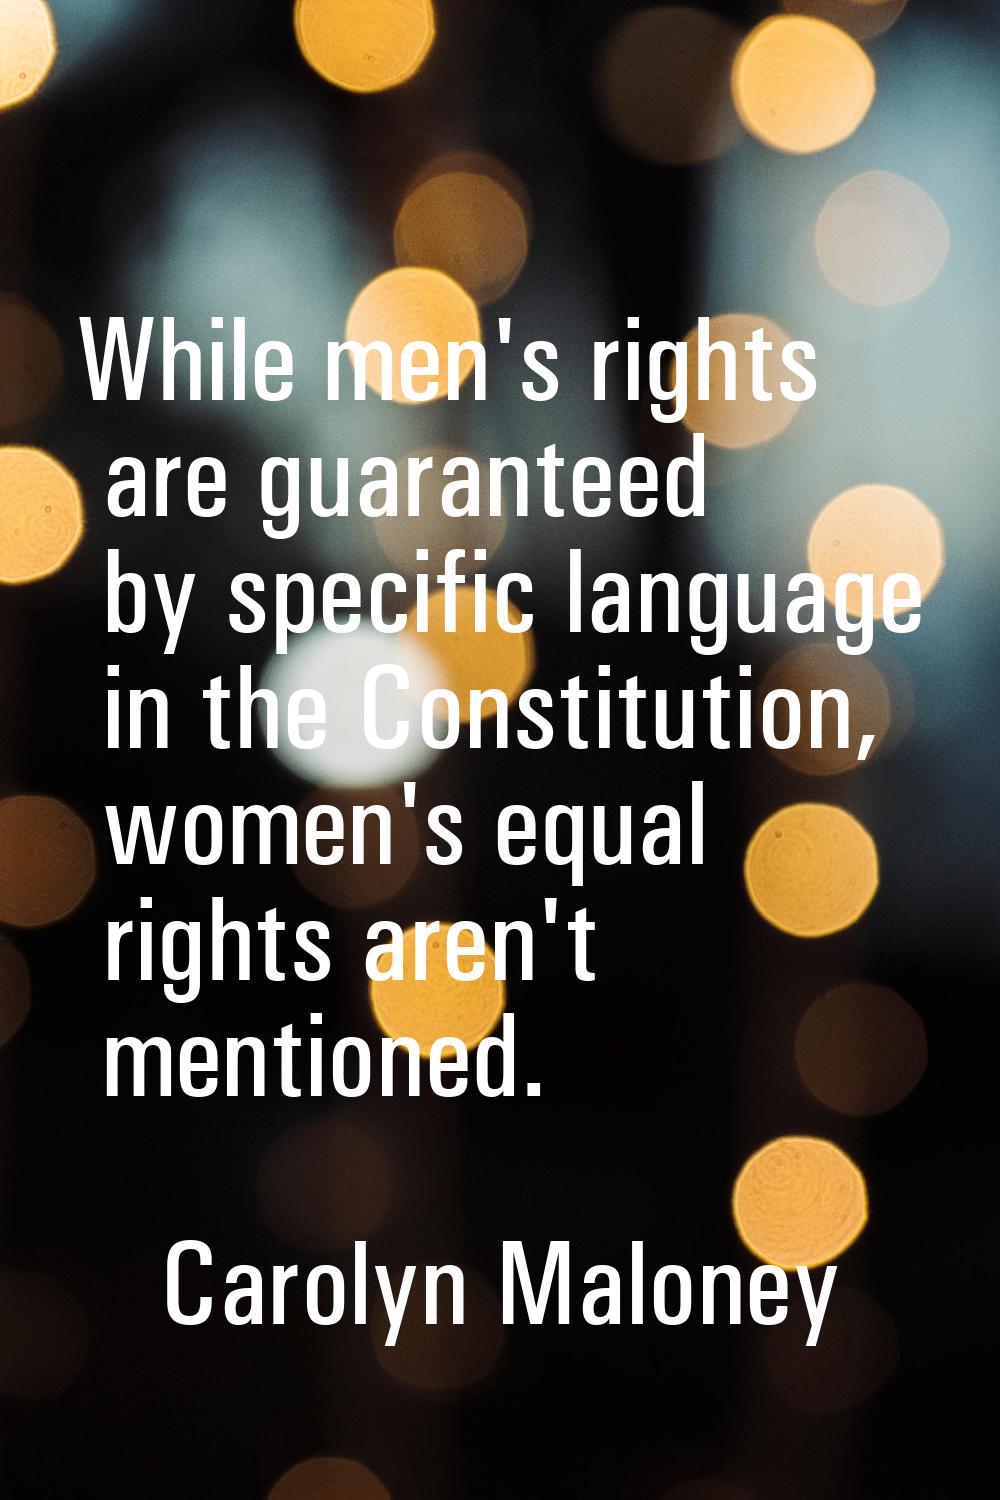 While men's rights are guaranteed by specific language in the Constitution, women's equal rights ar